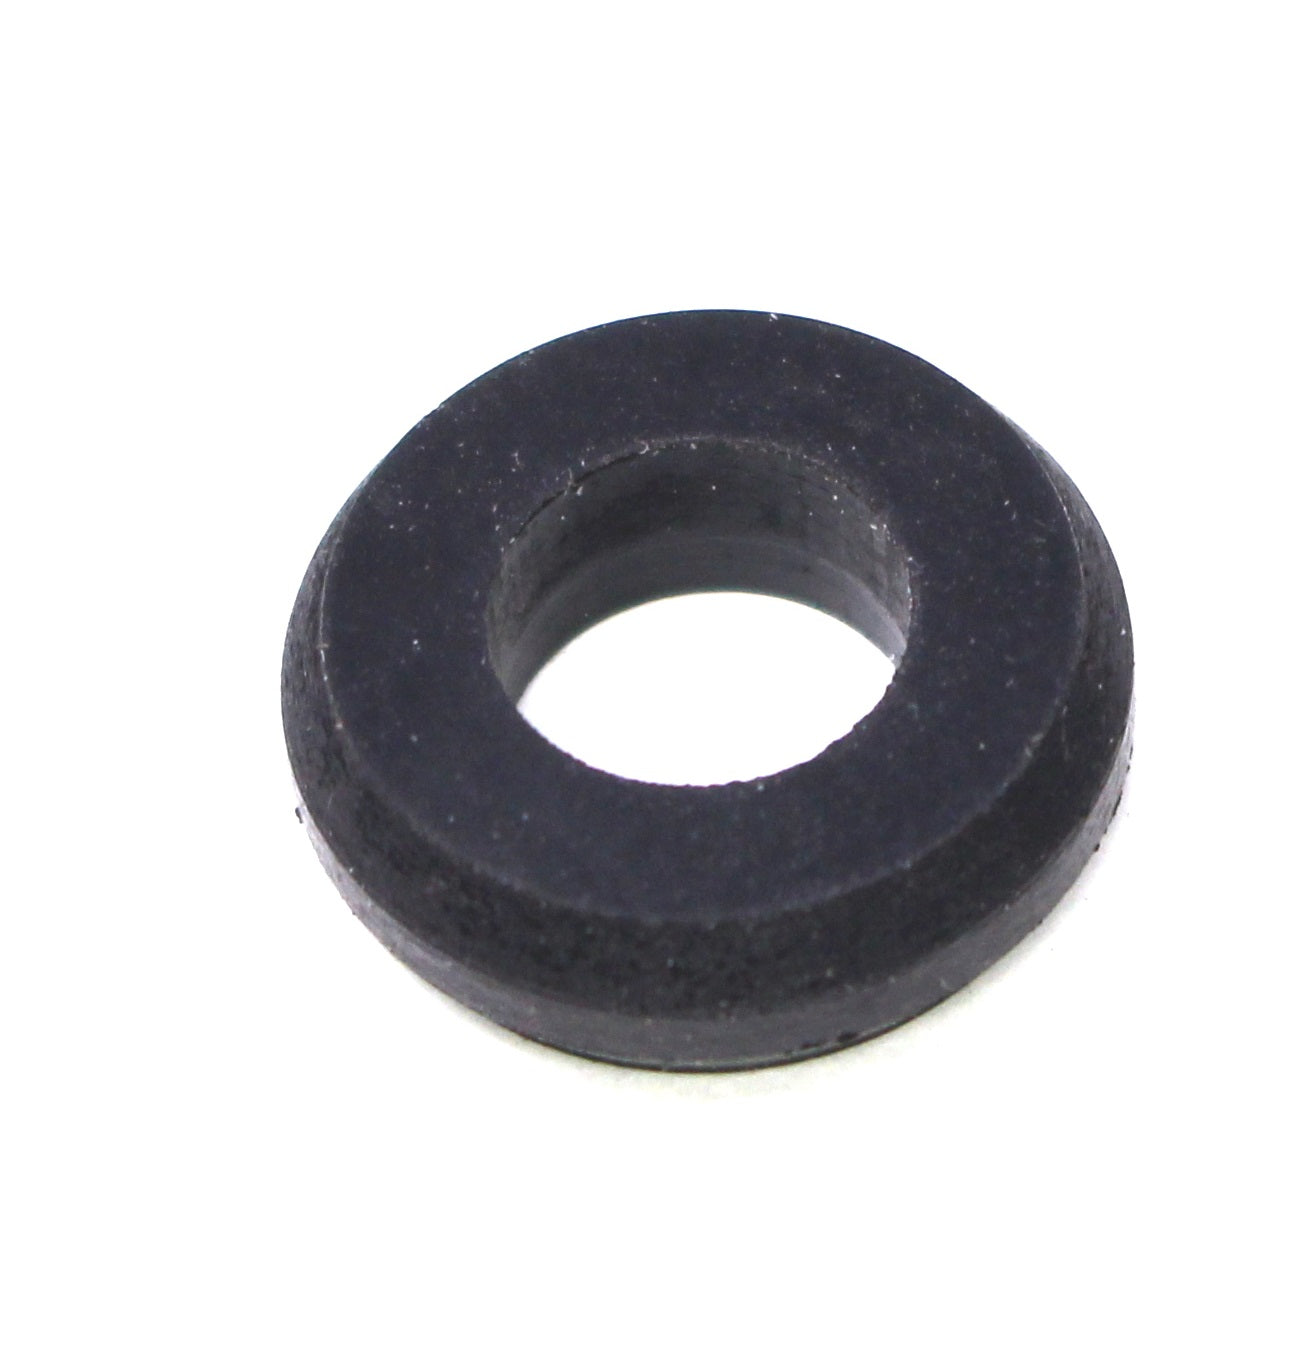 Aftermarket Sea-Doo Washer / Rubber Grommet 211100009 for Steering Reverse Cable & Can-Am Traxter Cargo Box Bombardier Canam